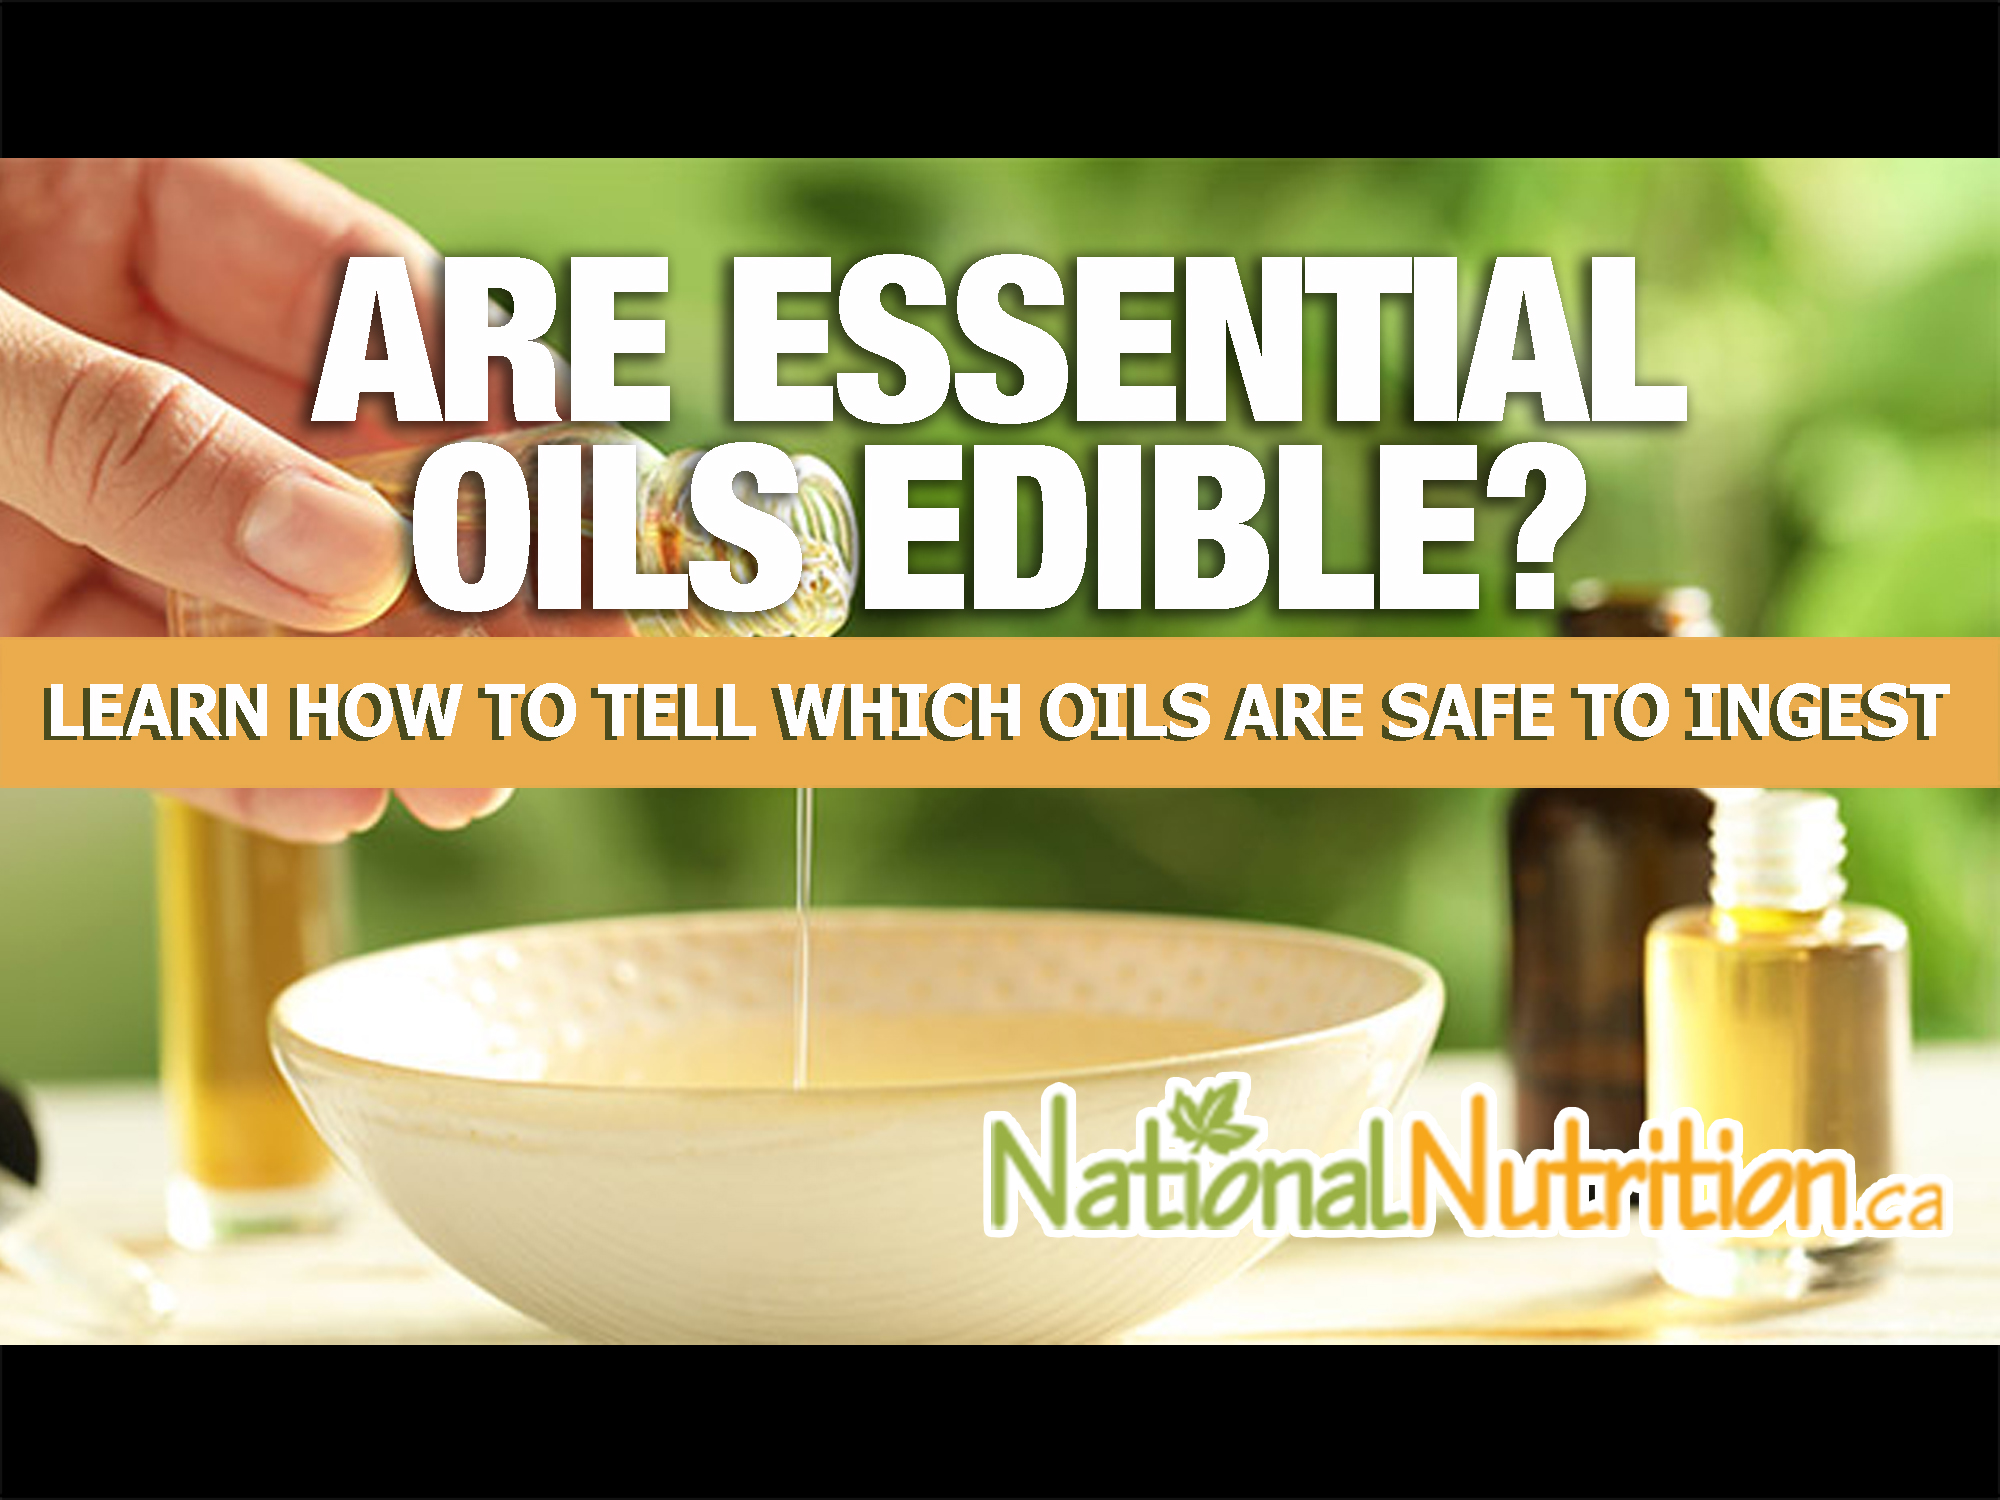 2023/04/Are-Essential-Oils-Edible_-Learn-How-To-Tell-Which-Oils-Are-Safe-To-Ingest.jpg